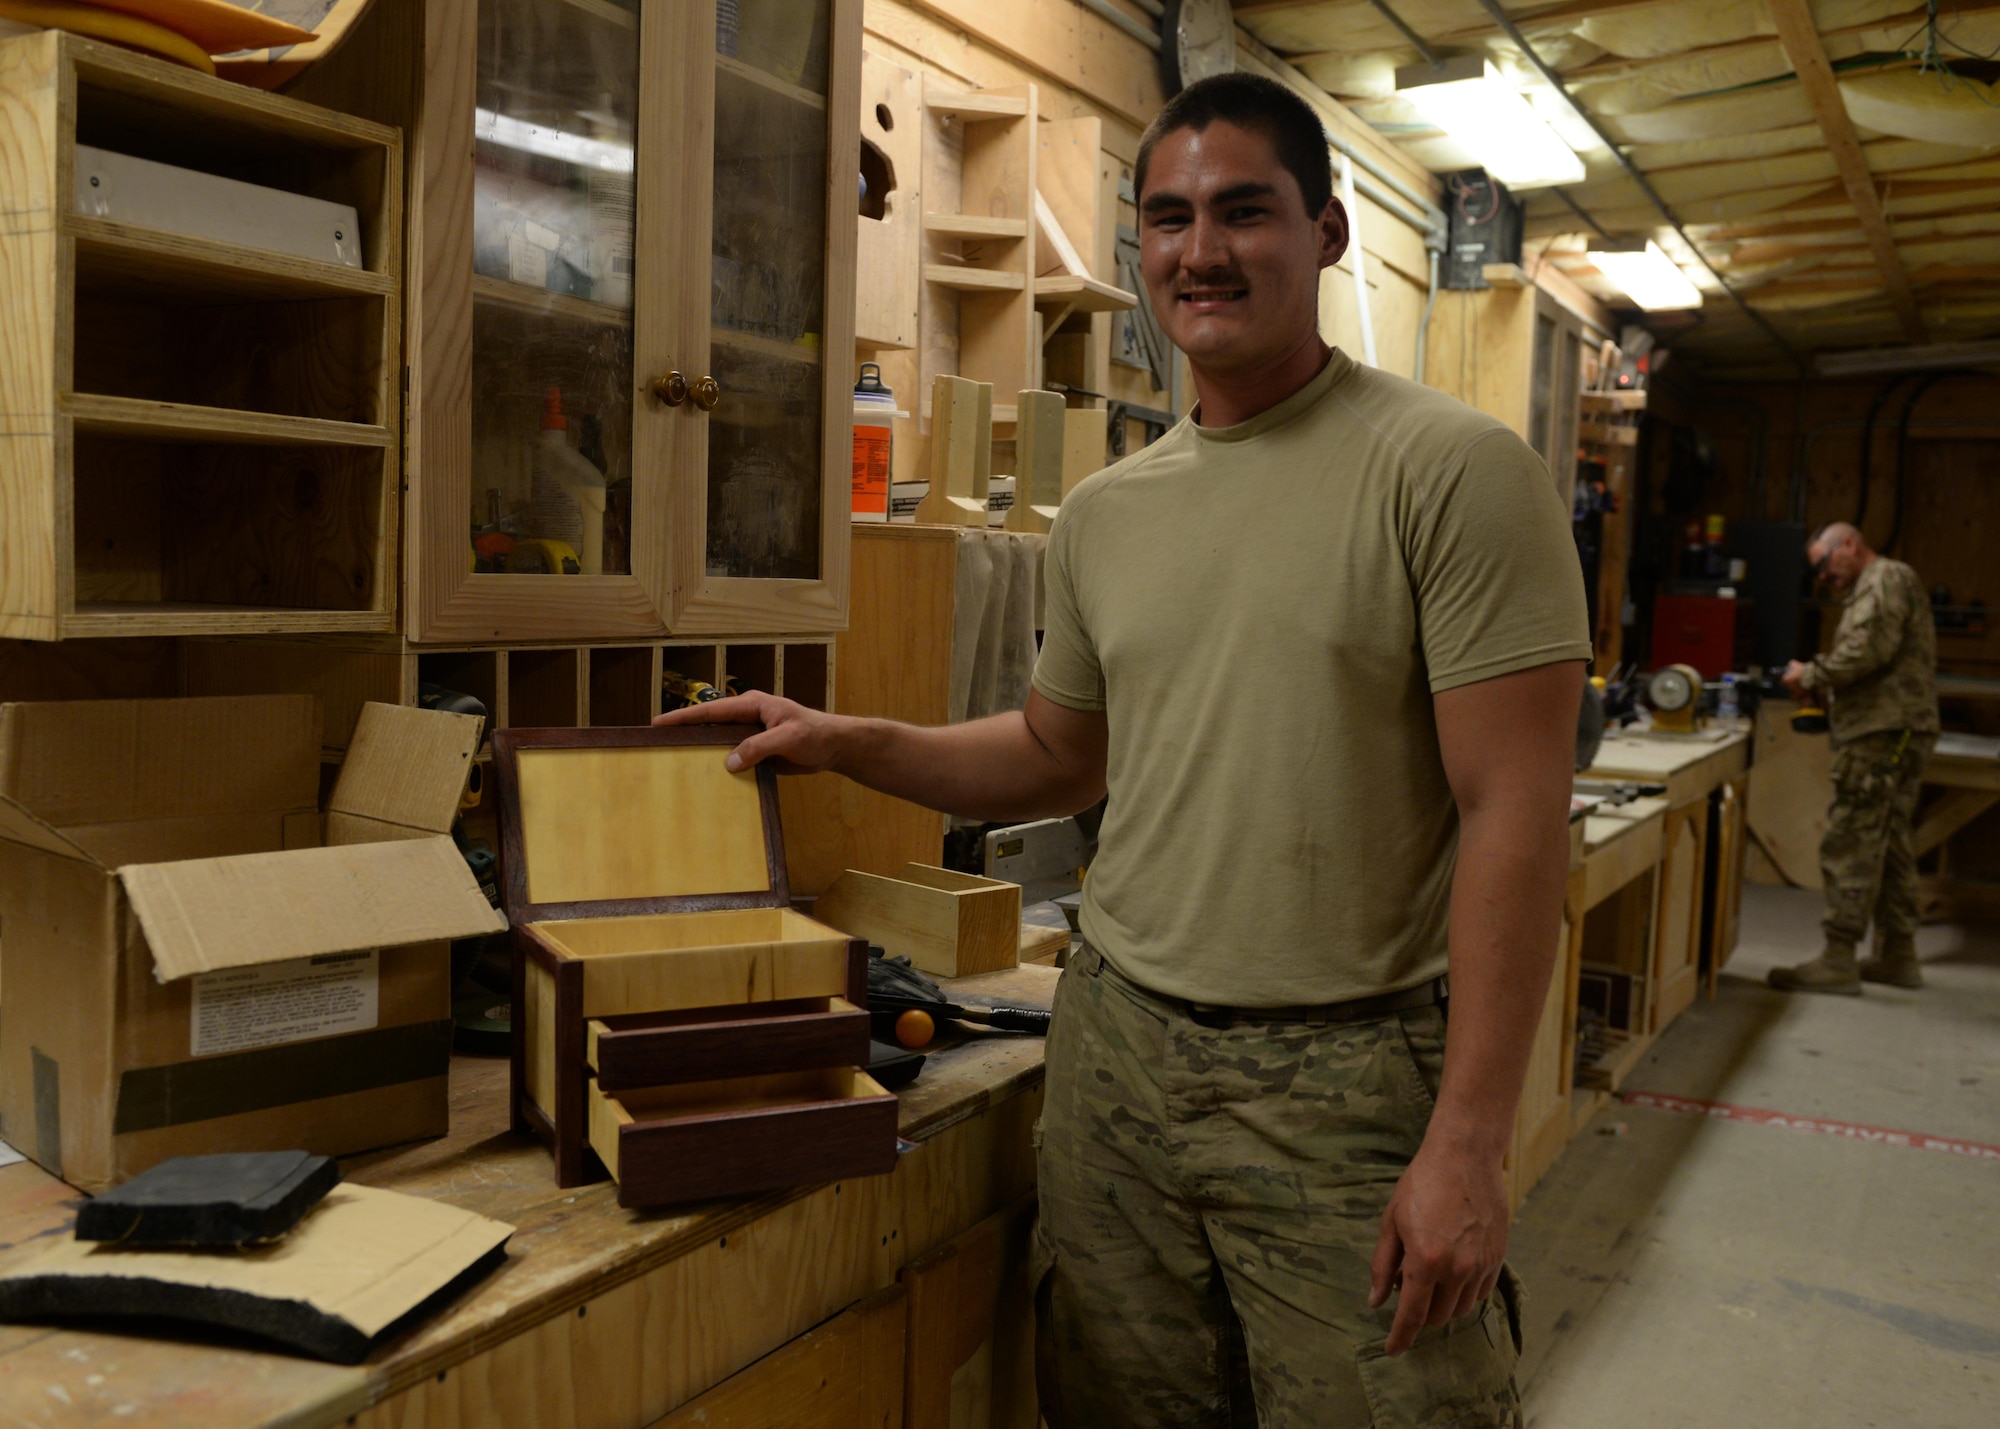 U.S. Air Force Senior Airman Carl Vanlandingham, 455th Expeditionary Civil Engineer Squadron structural journeyman, poses next to a project he built from scratch, July 16, 2015, at Bagram Airfield, Afghanistan. Vanlandingham builds various projects during duty and on his days off to support the mission here. (U.S. Air Force photo by Senior Airman Cierra Presentado/Released)